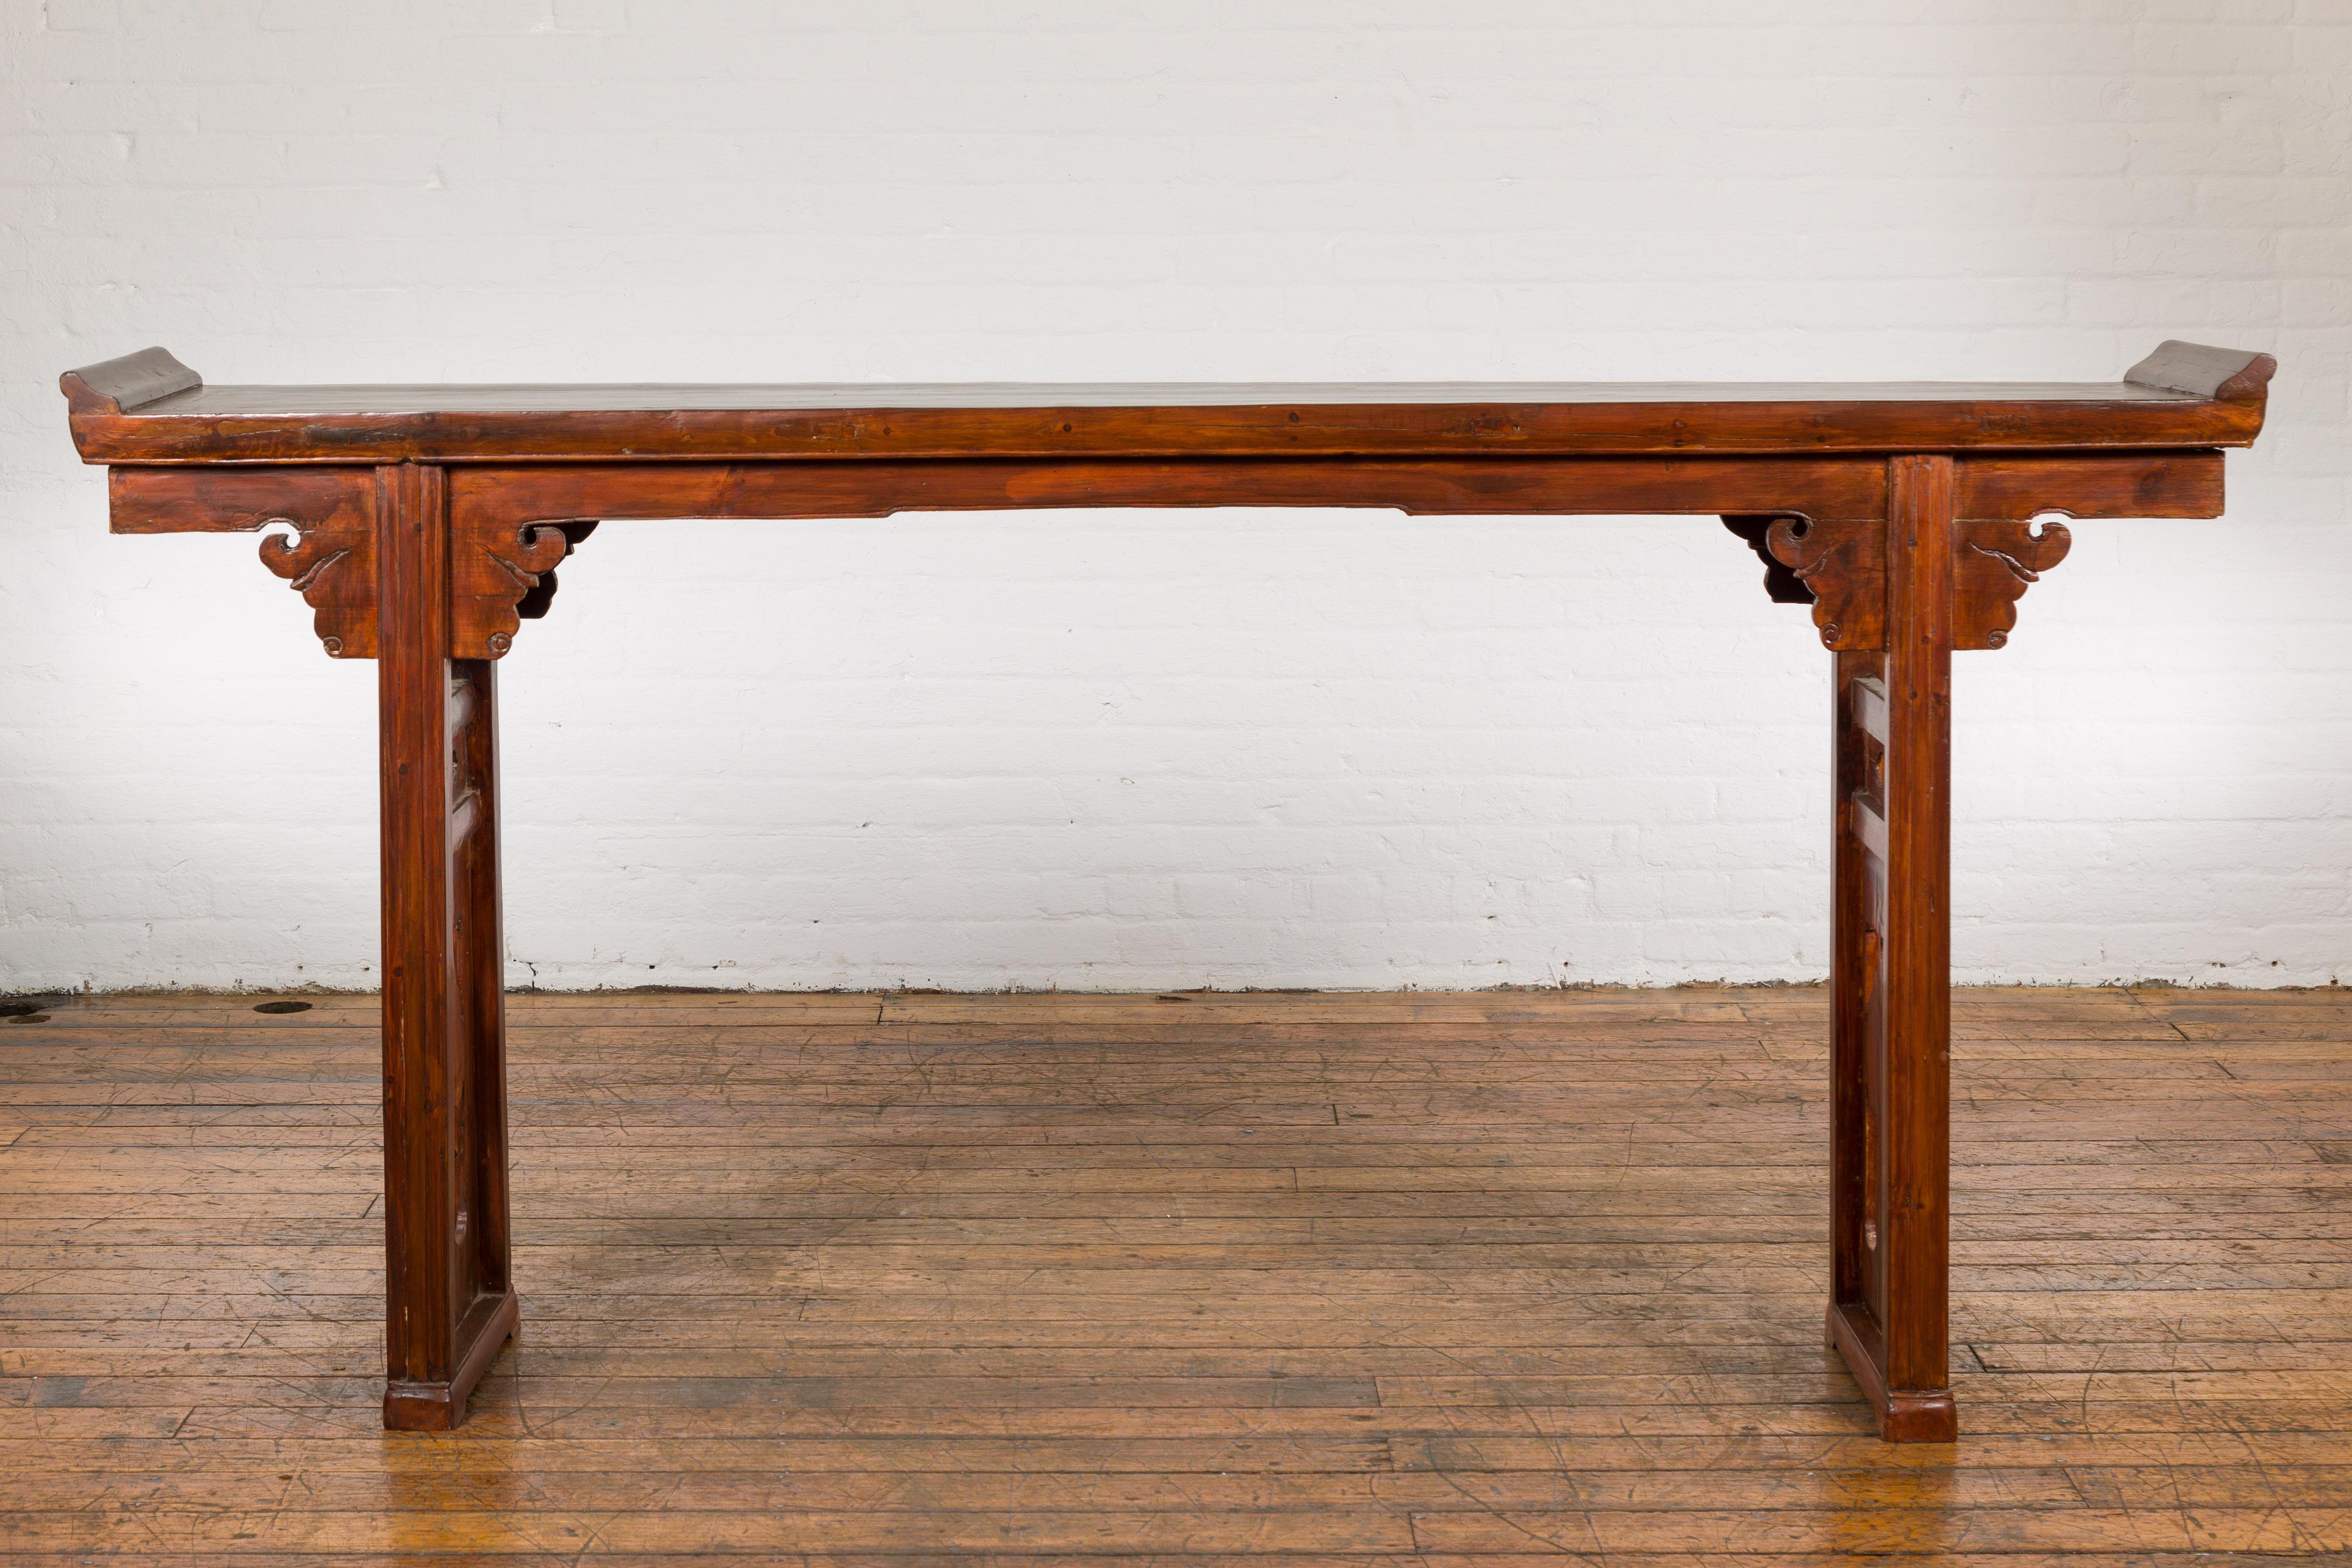 A long Chinese late Qing Dynasty period carved wooden altar console table from the early 20th century, with everted flanged and carved sides adorned with pierced trees motifs. Elevate your interior design with this long Chinese late Qing Dynasty